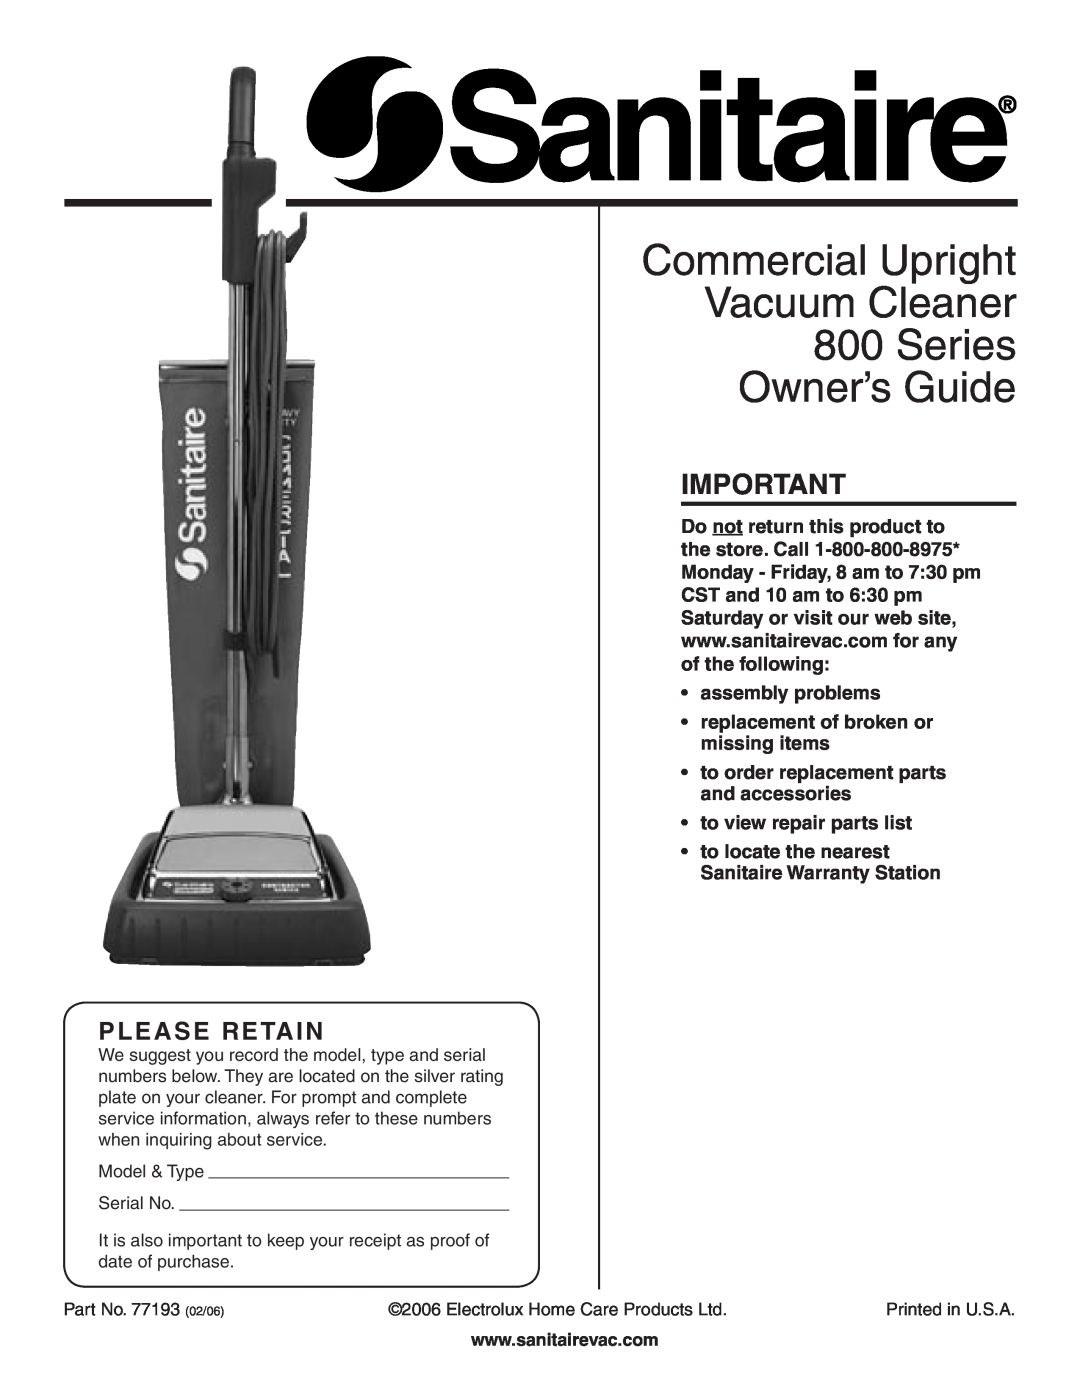 Sanitaire warranty Commercial Upright Vacuum Cleaner 800 Series, Owner’s Guide, Please Retain 